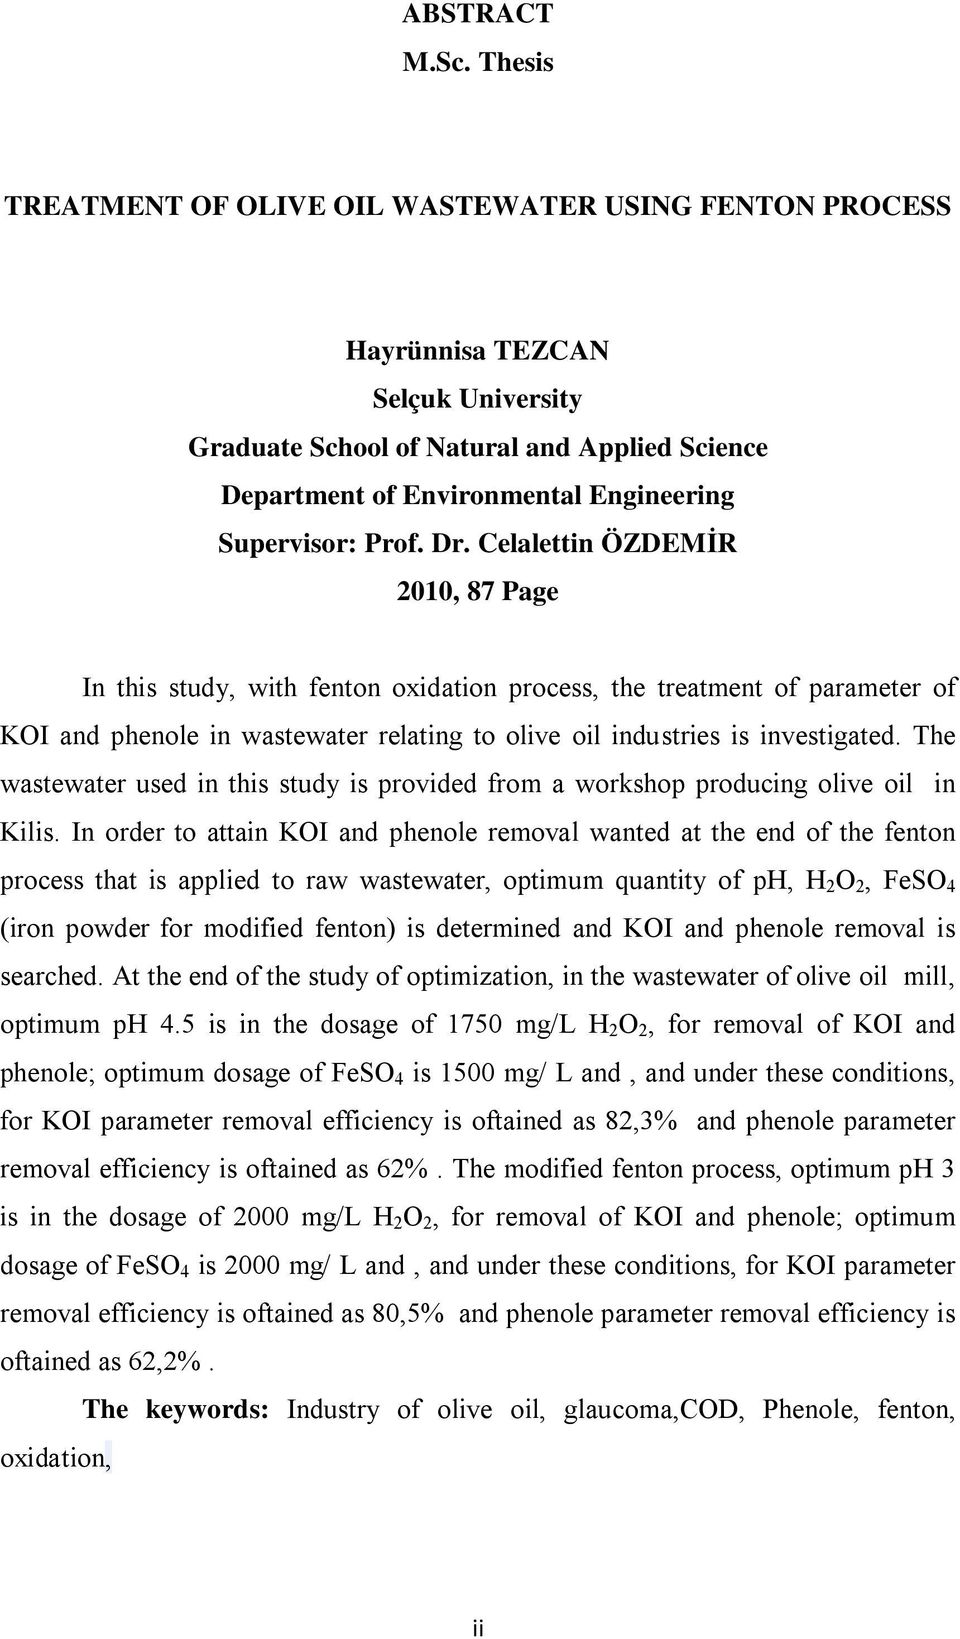 Prof. Dr. Celalettin ÖZDEMİR 2010, 87 Page In this study, with fenton oxidation process, the treatment of parameter of KOI and phenole in wastewater relating to olive oil industries is investigated.